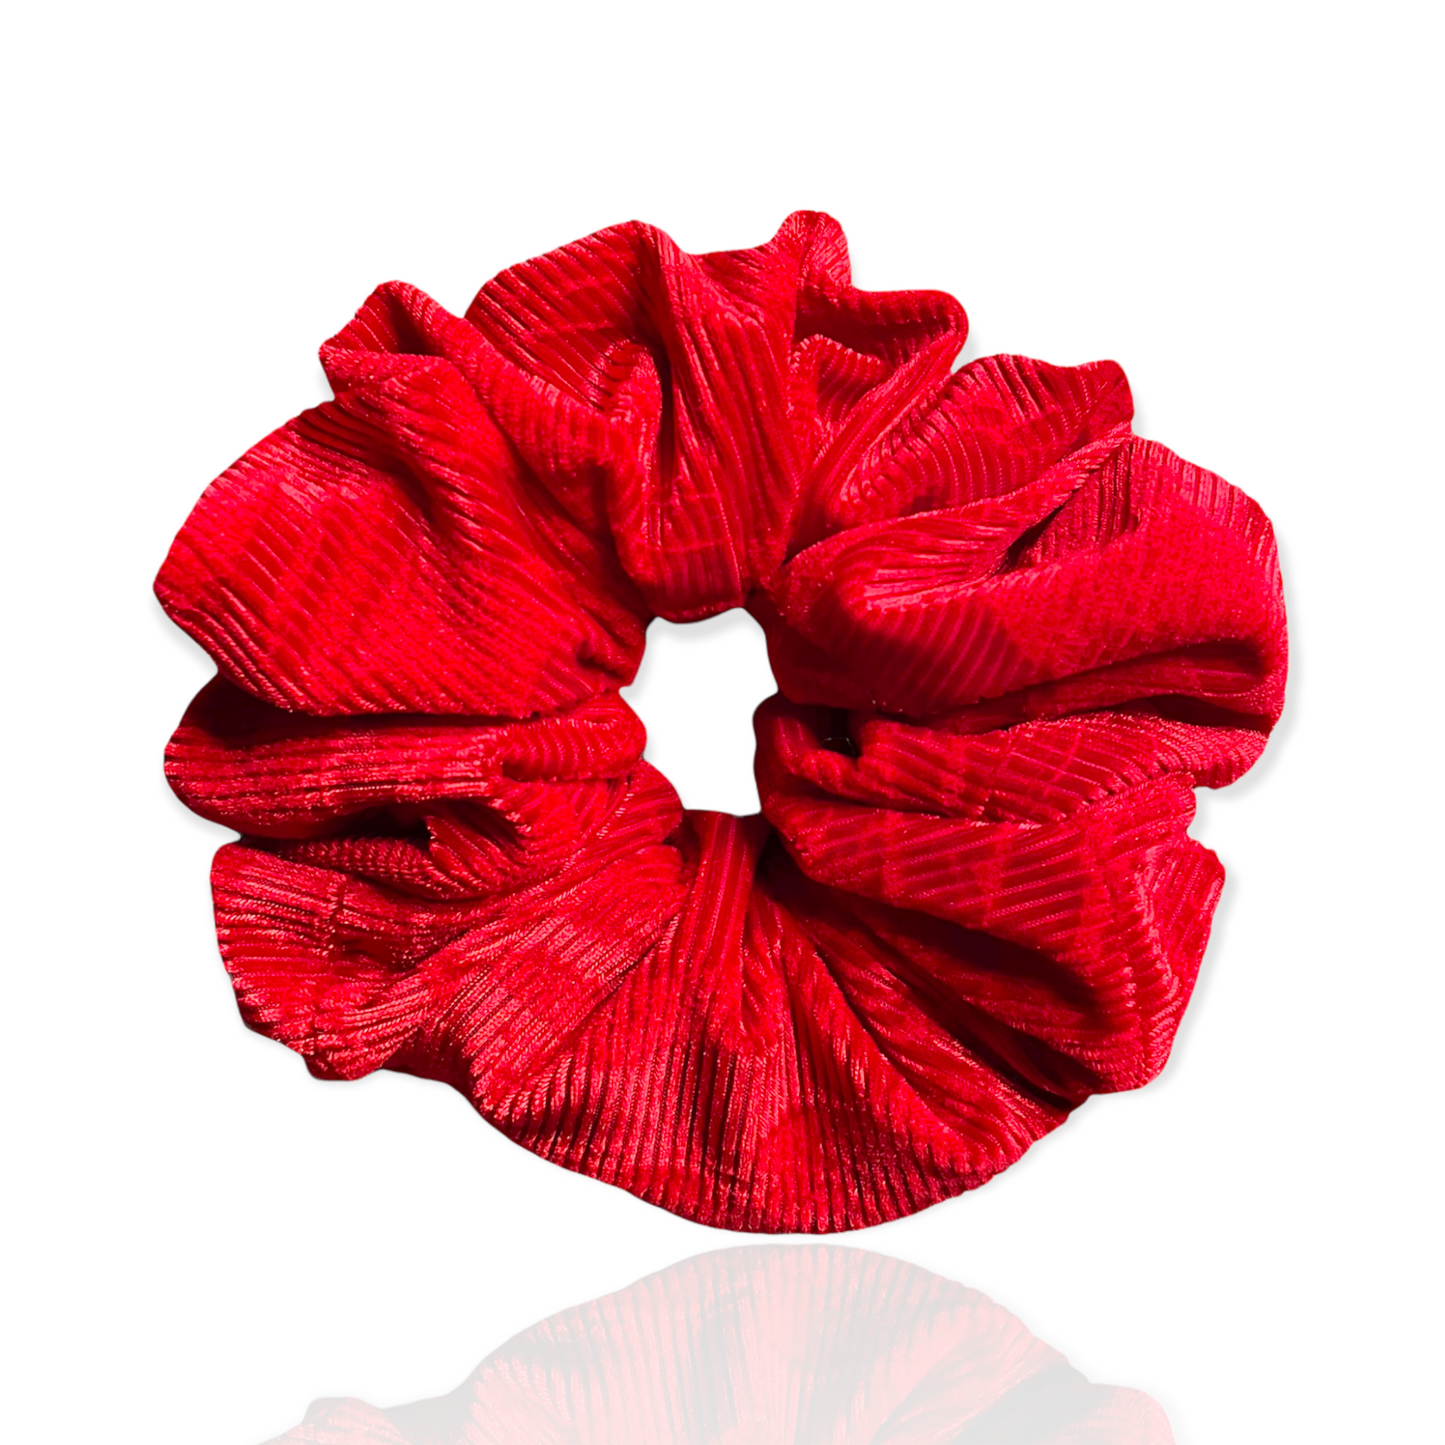 Large oversized red scrunchie with zipper for small items.